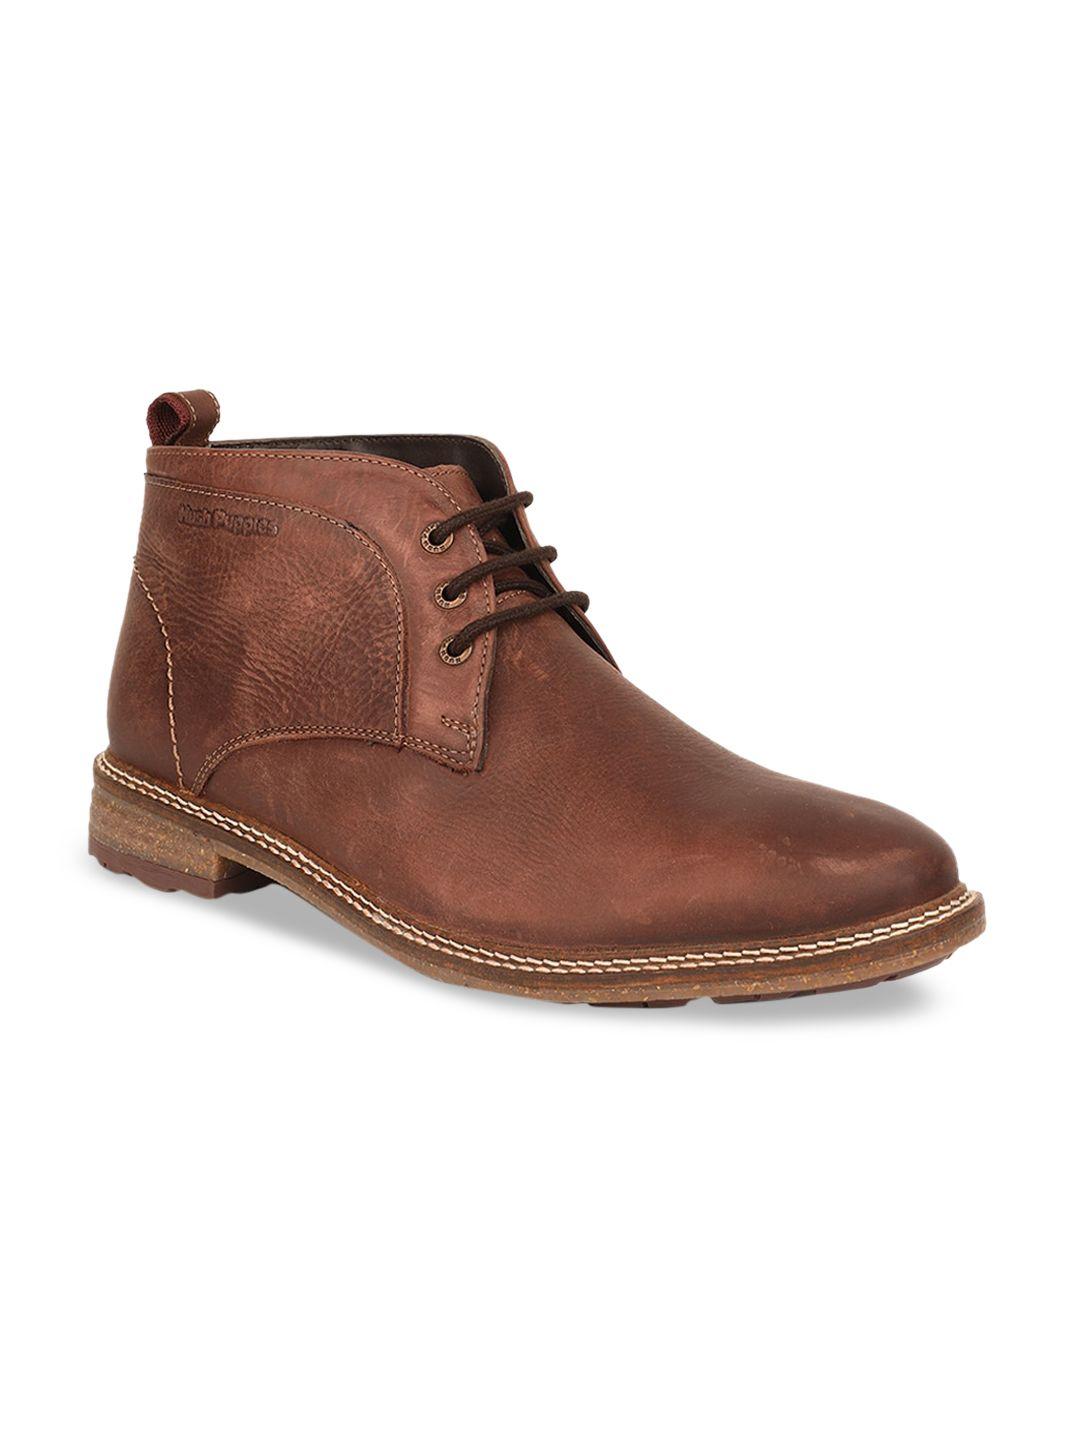 hush-puppies-men-brown-solid-leather-mid-top-flat-boots